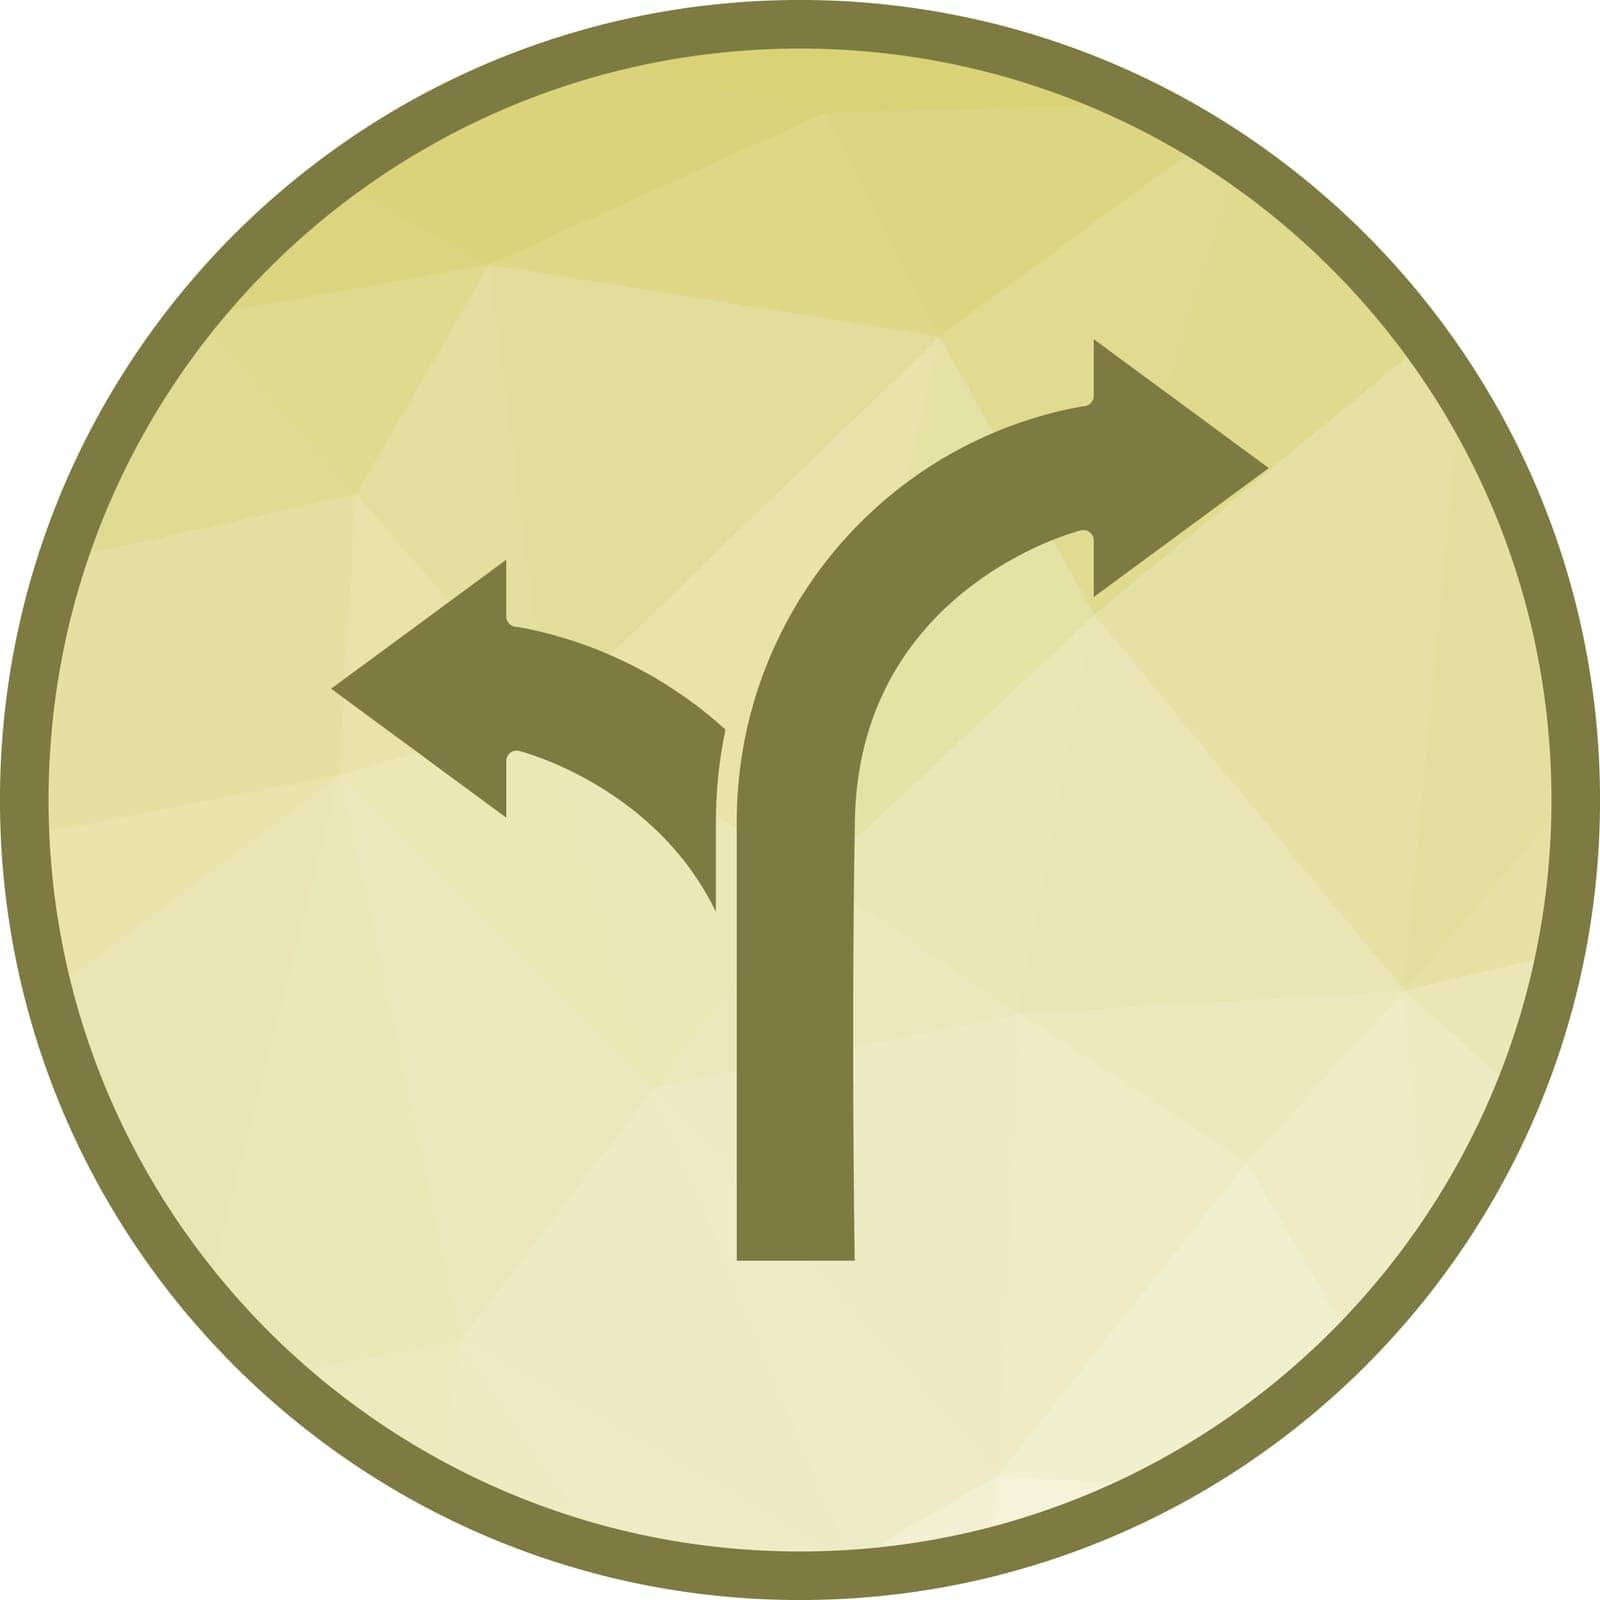 Business Path icon vector image. by ICONBUNNY